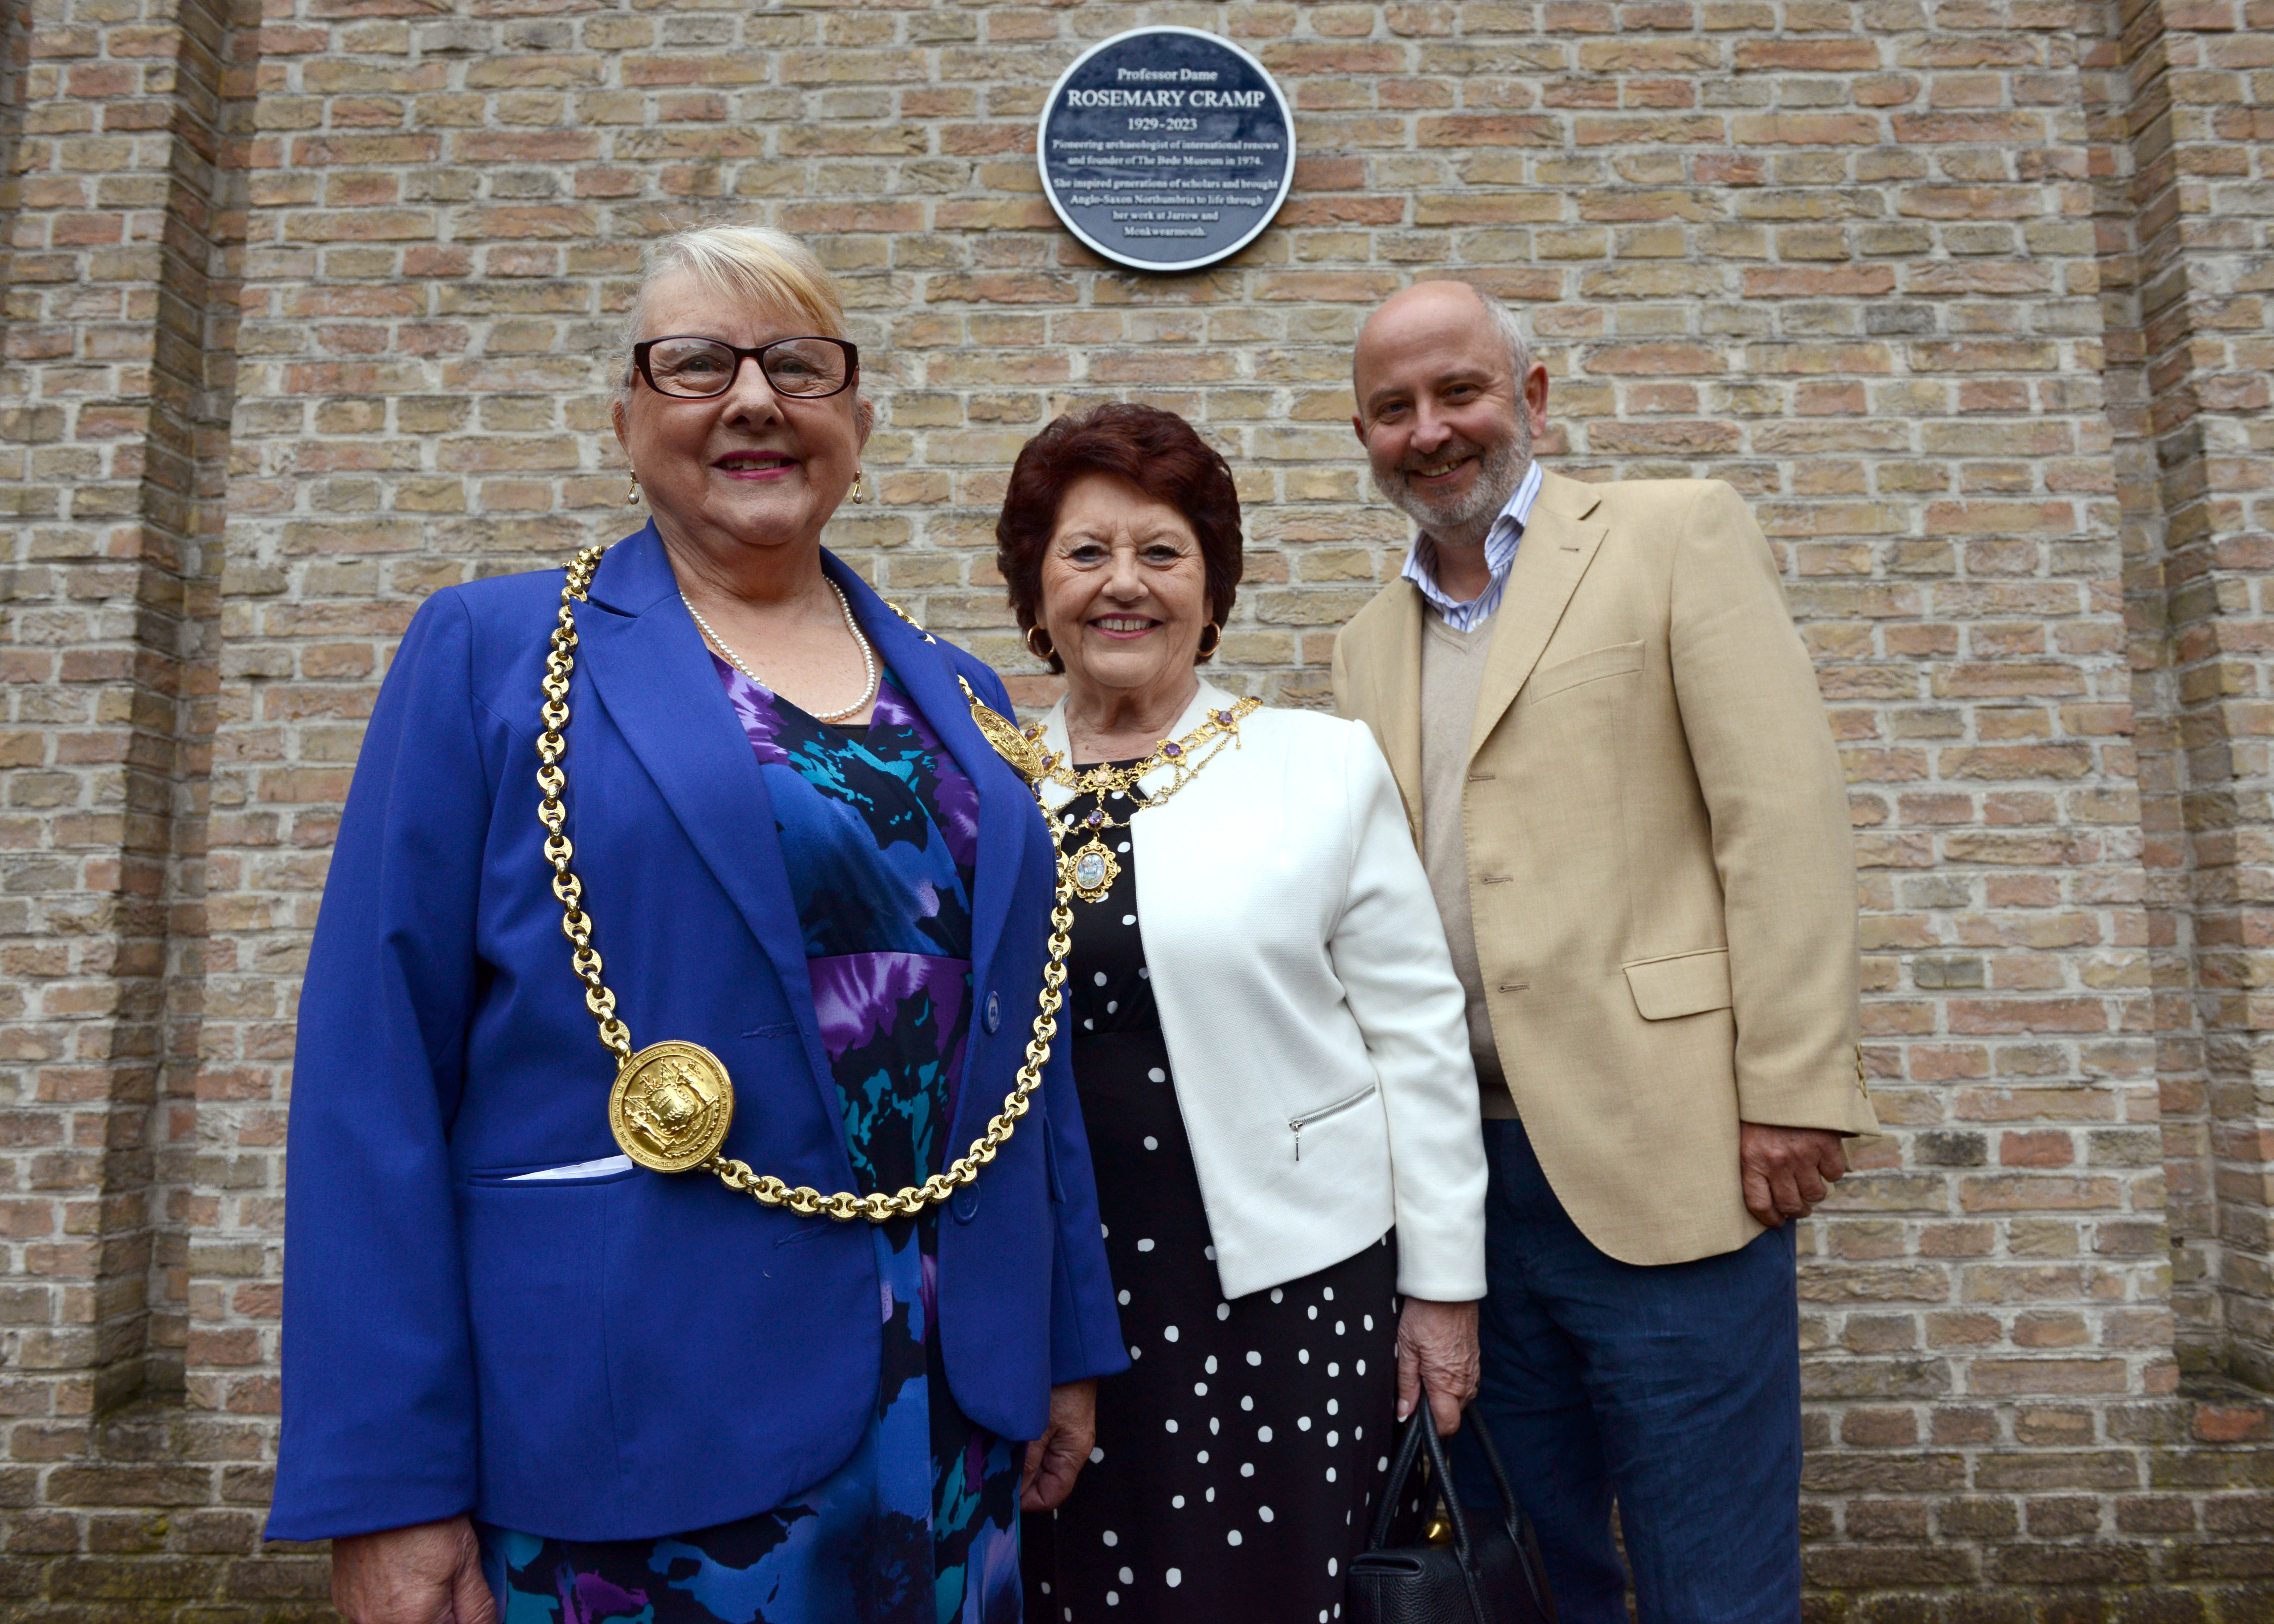 Three smartly dressed and smiling people, Councillor Fay Cunningham, Mayoress Stella Matthewson and Professor Chris Gerrard, stand in front of a wall that features a blue plaque honouring Professor Dame Rosemary Cramp, 1929 - 2023.